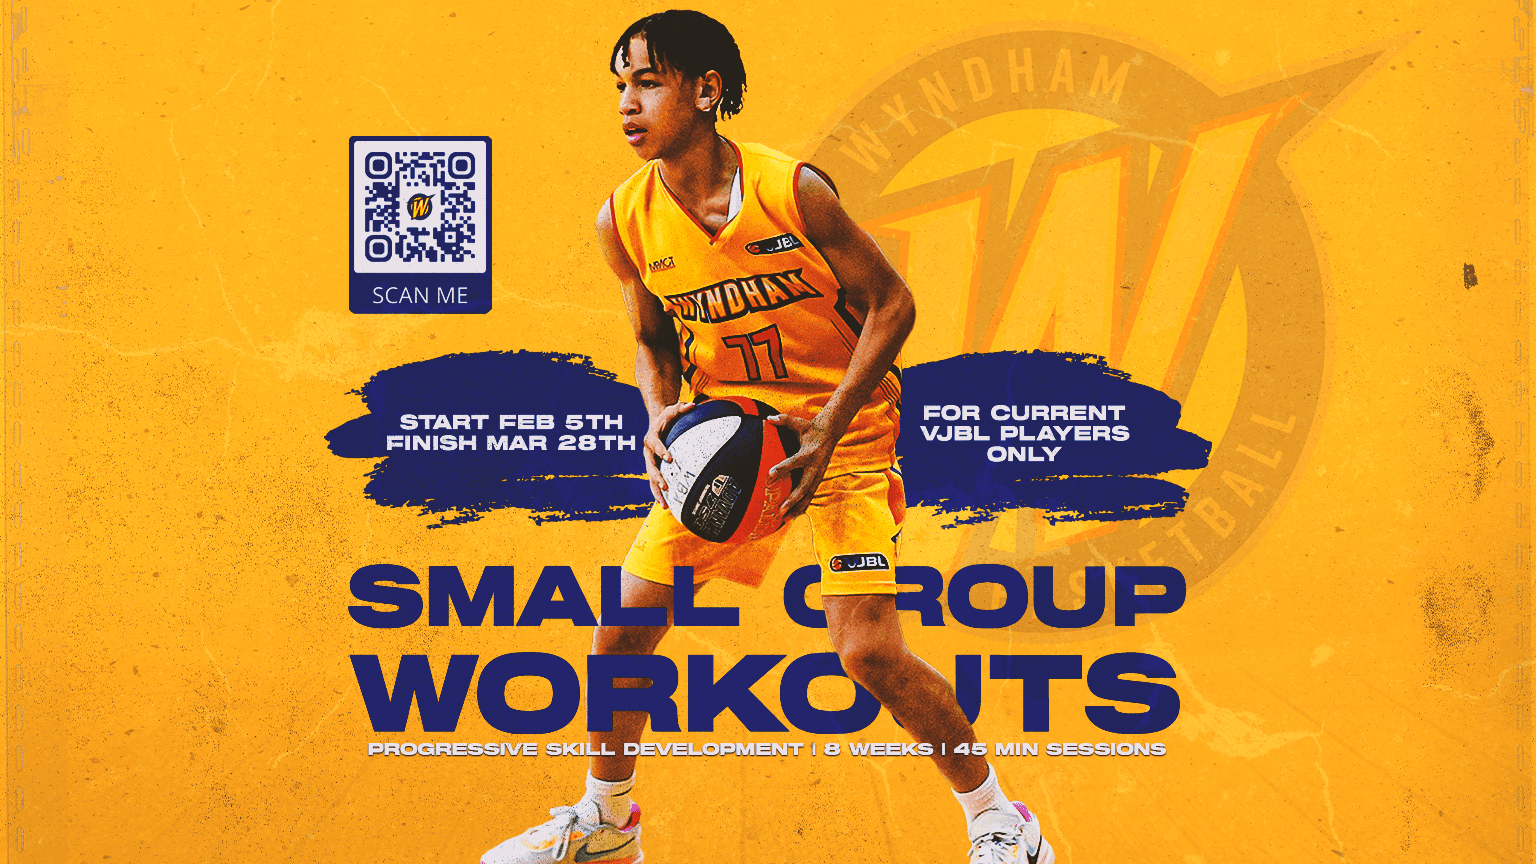 Small Group Workouts – VJBL Players only